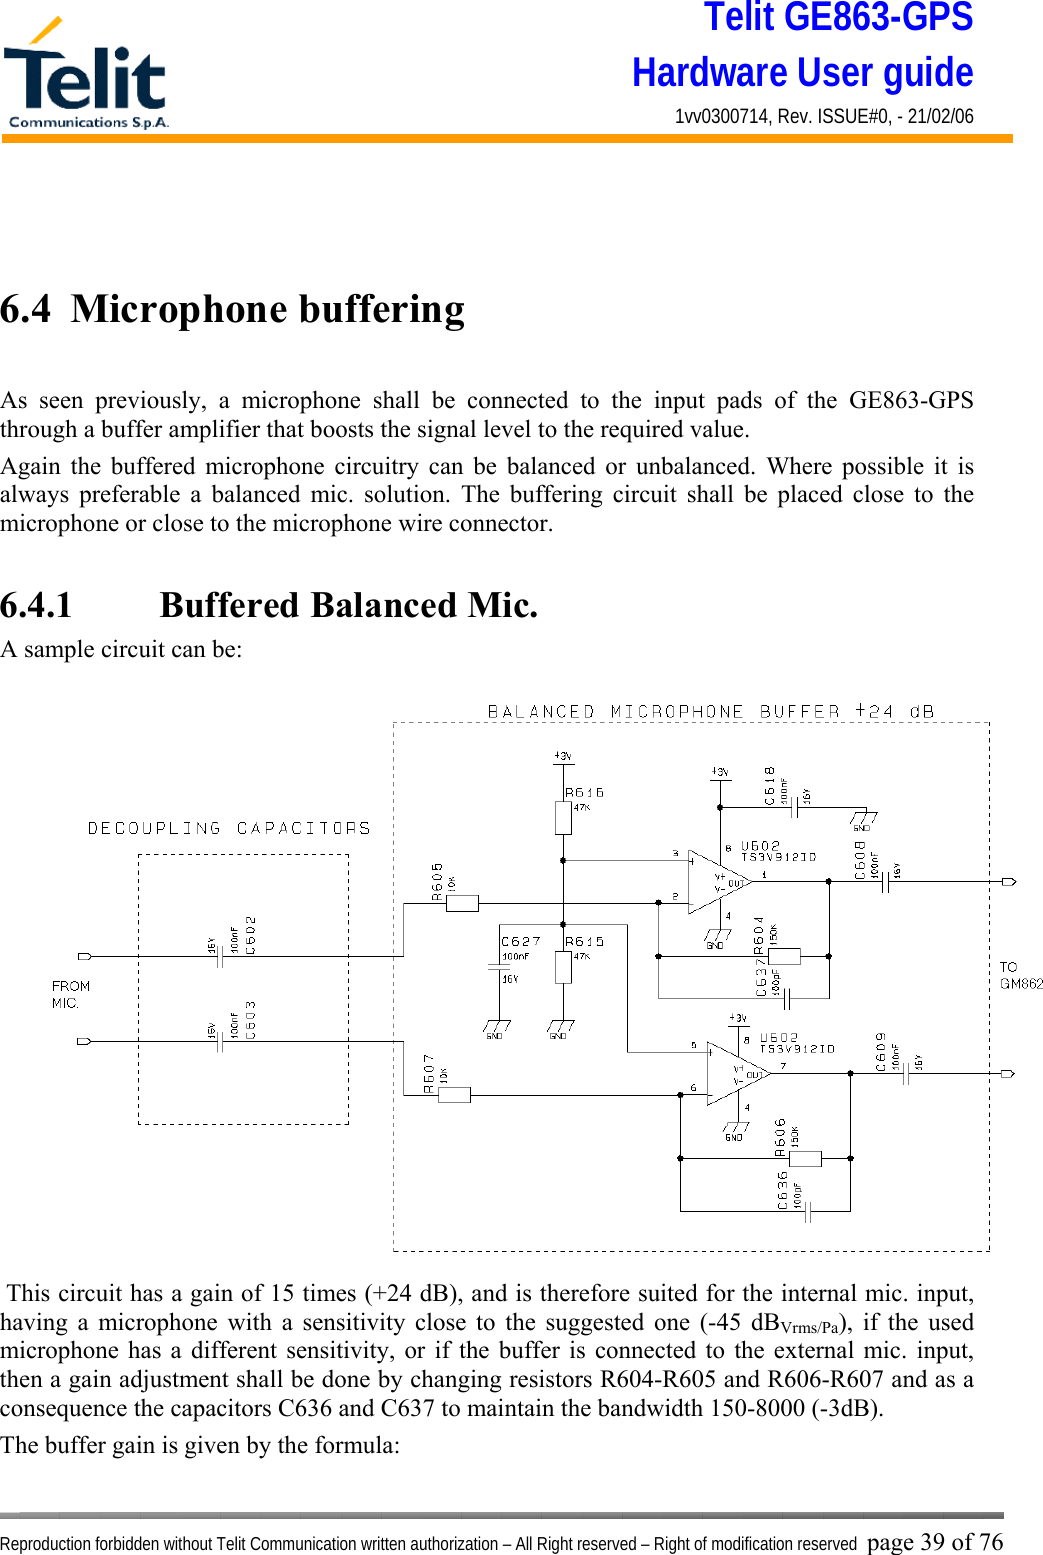 Telit GE863-GPS Hardware User guide 1vv0300714, Rev. ISSUE#0, - 21/02/06    Reproduction forbidden without Telit Communication written authorization – All Right reserved – Right of modification reserved page 39 of 76   6.4  Microphone buffering  As seen previously, a microphone shall be connected to the input pads of the GE863-GPS through a buffer amplifier that boosts the signal level to the required value. Again the buffered microphone circuitry can be balanced or unbalanced. Where possible it is always preferable a balanced mic. solution. The buffering circuit shall be placed close to the microphone or close to the microphone wire connector.  6.4.1    Buffered Balanced Mic. A sample circuit can be:  This circuit has a gain of 15 times (+24 dB), and is therefore suited for the internal mic. input, having a microphone with a sensitivity close to the suggested one (-45 dBVrms/Pa), if the used microphone has a different sensitivity, or if the buffer is connected to the external mic. input, then a gain adjustment shall be done by changing resistors R604-R605 and R606-R607 and as a consequence the capacitors C636 and C637 to maintain the bandwidth 150-8000 (-3dB). The buffer gain is given by the formula: 